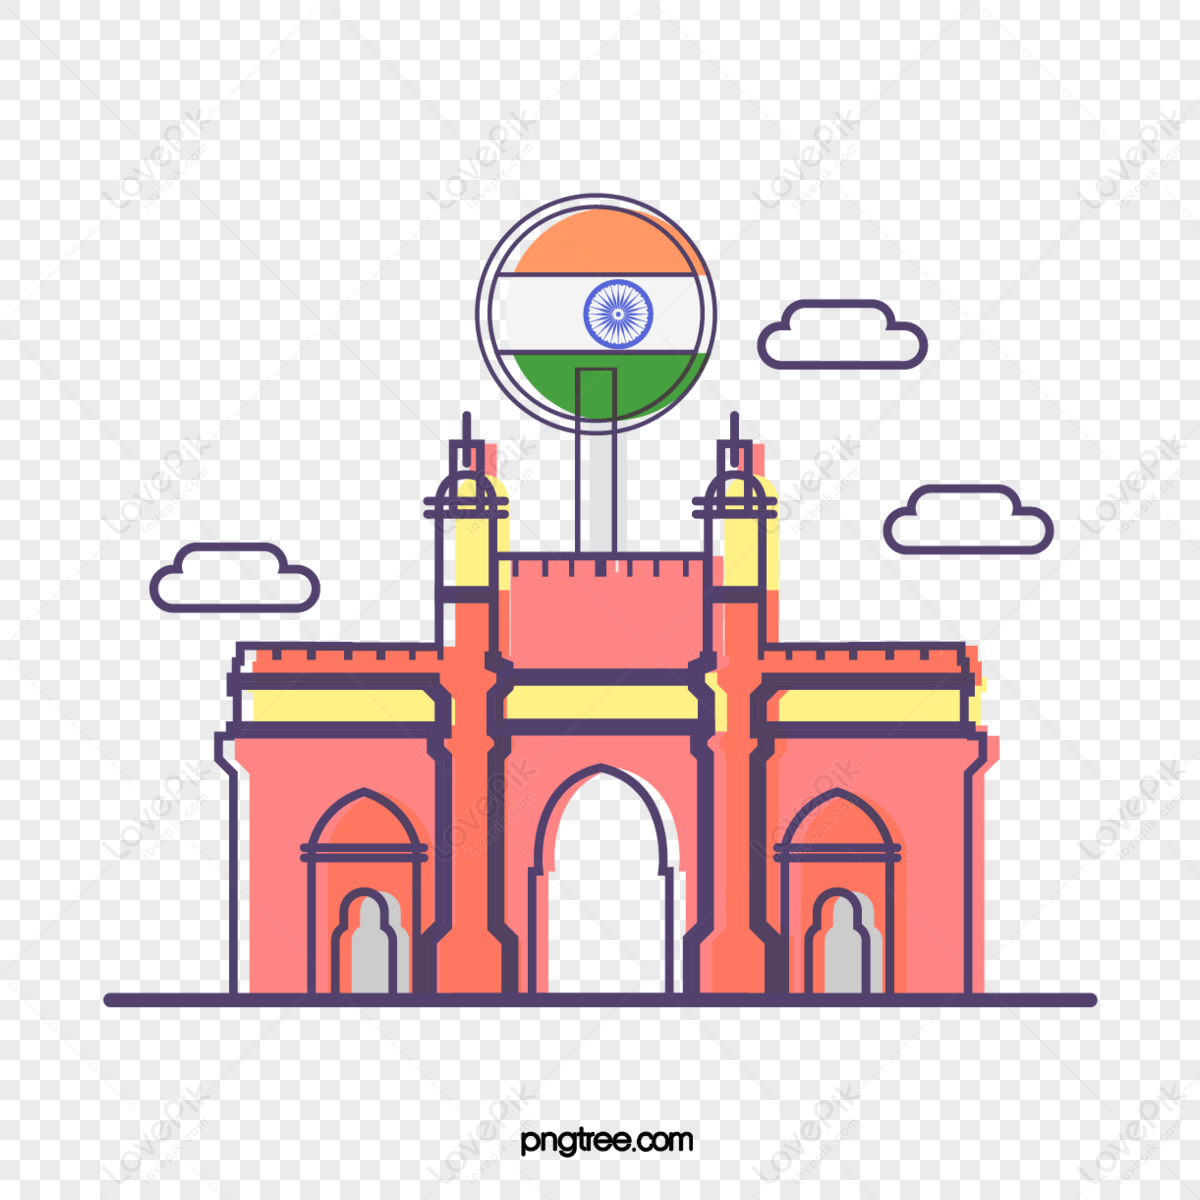 Map Of India High-Res Vector Graphic - Getty Images